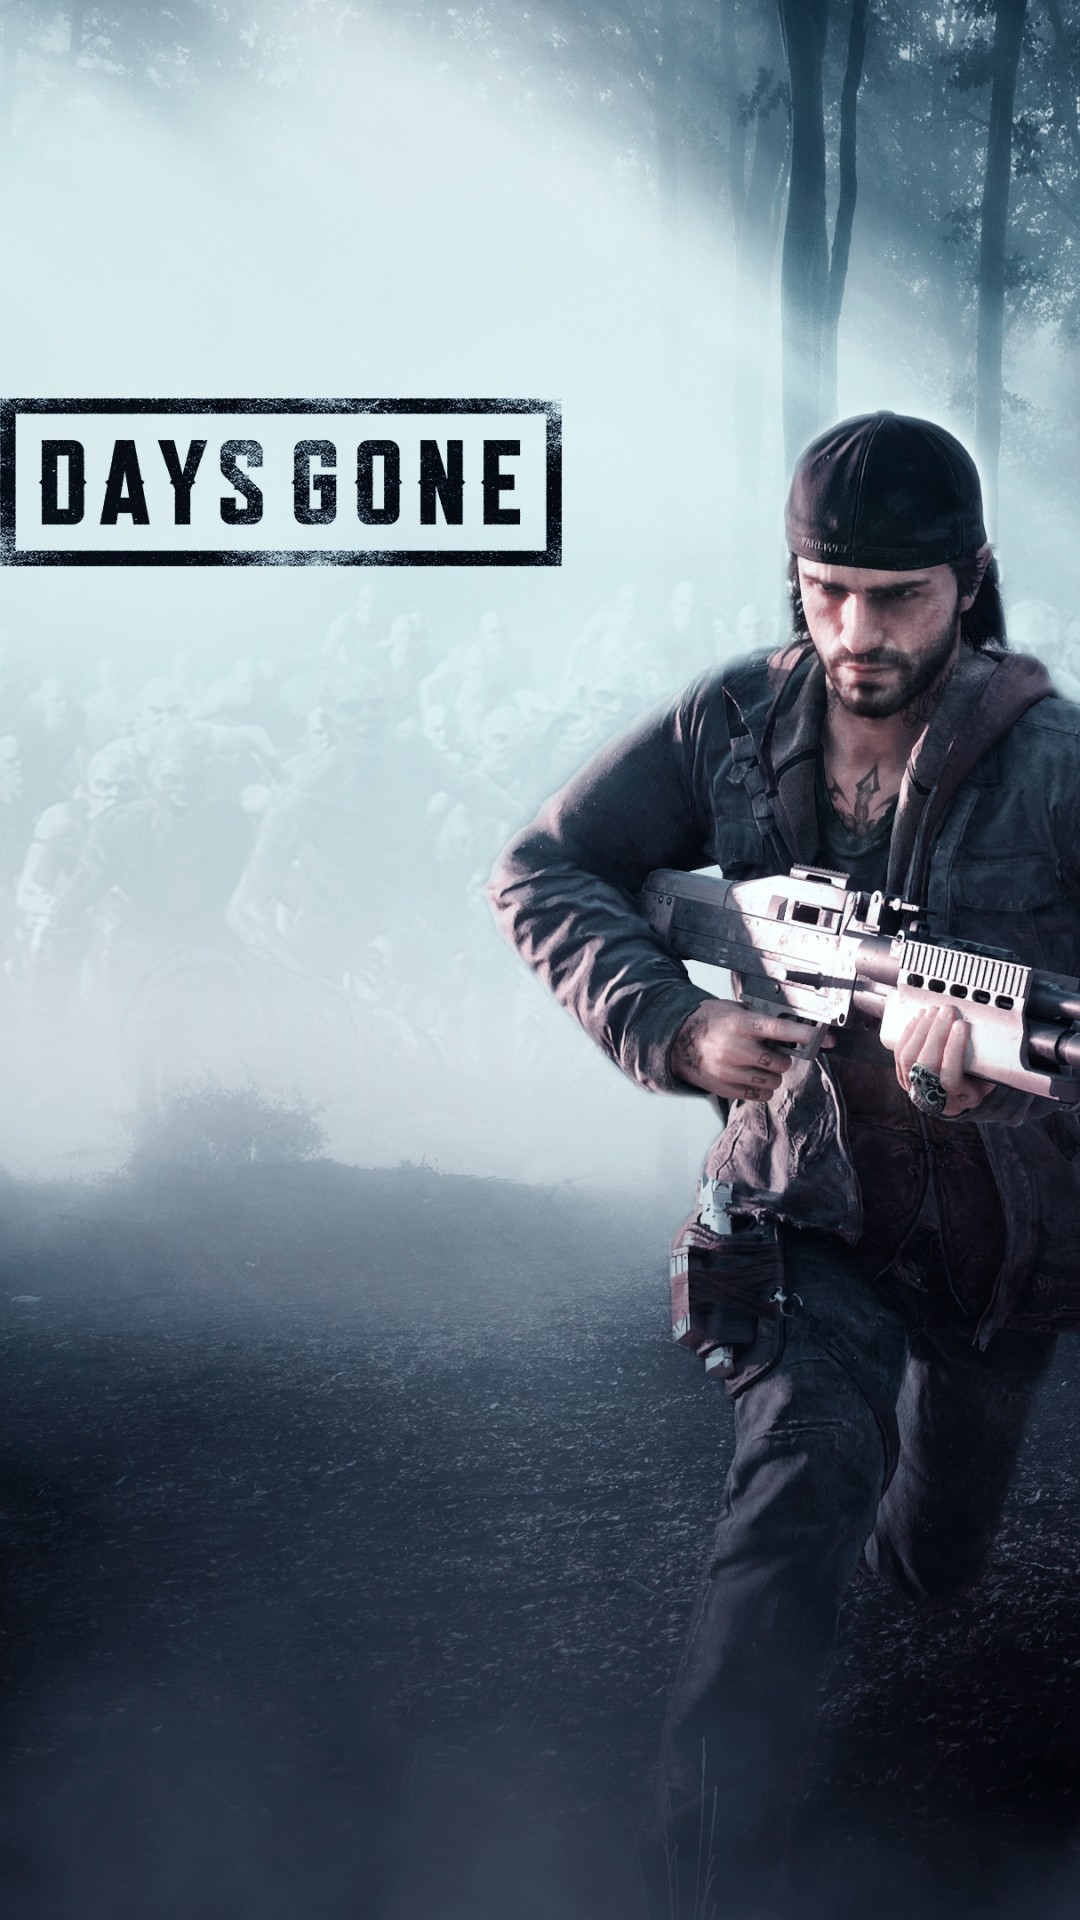 Days Gone free wallpaper for android